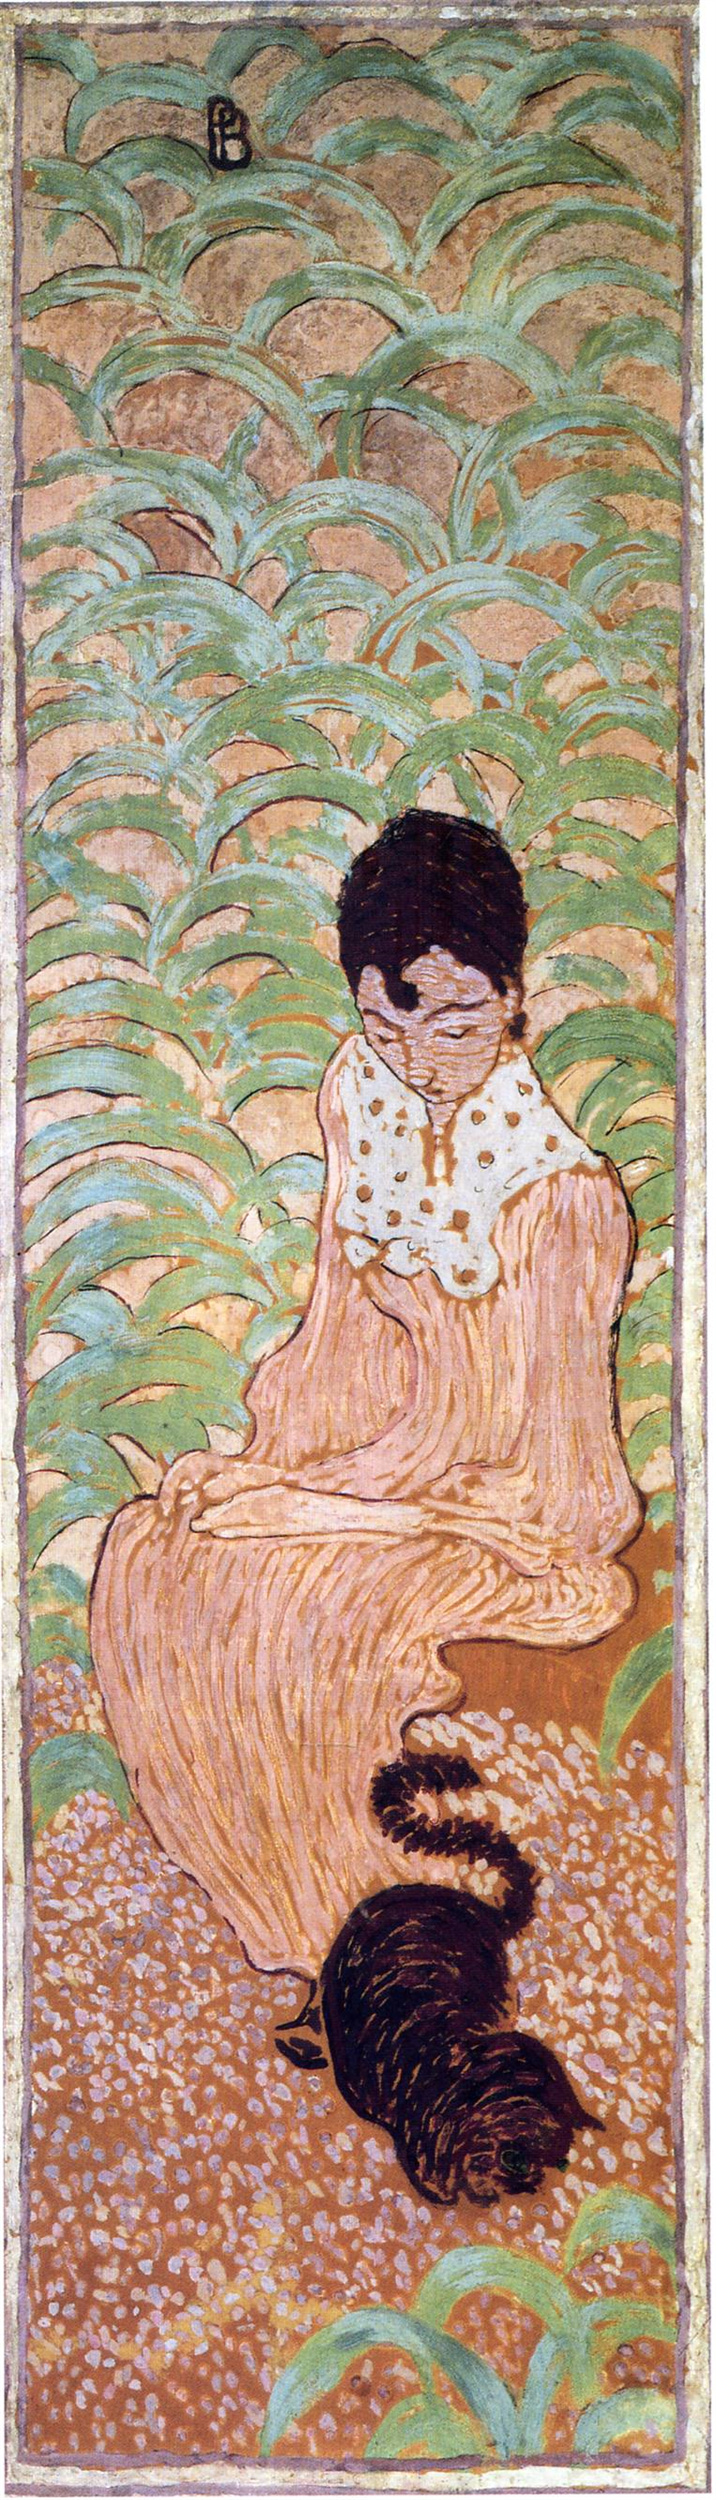 Sitting Woman with a Cat 